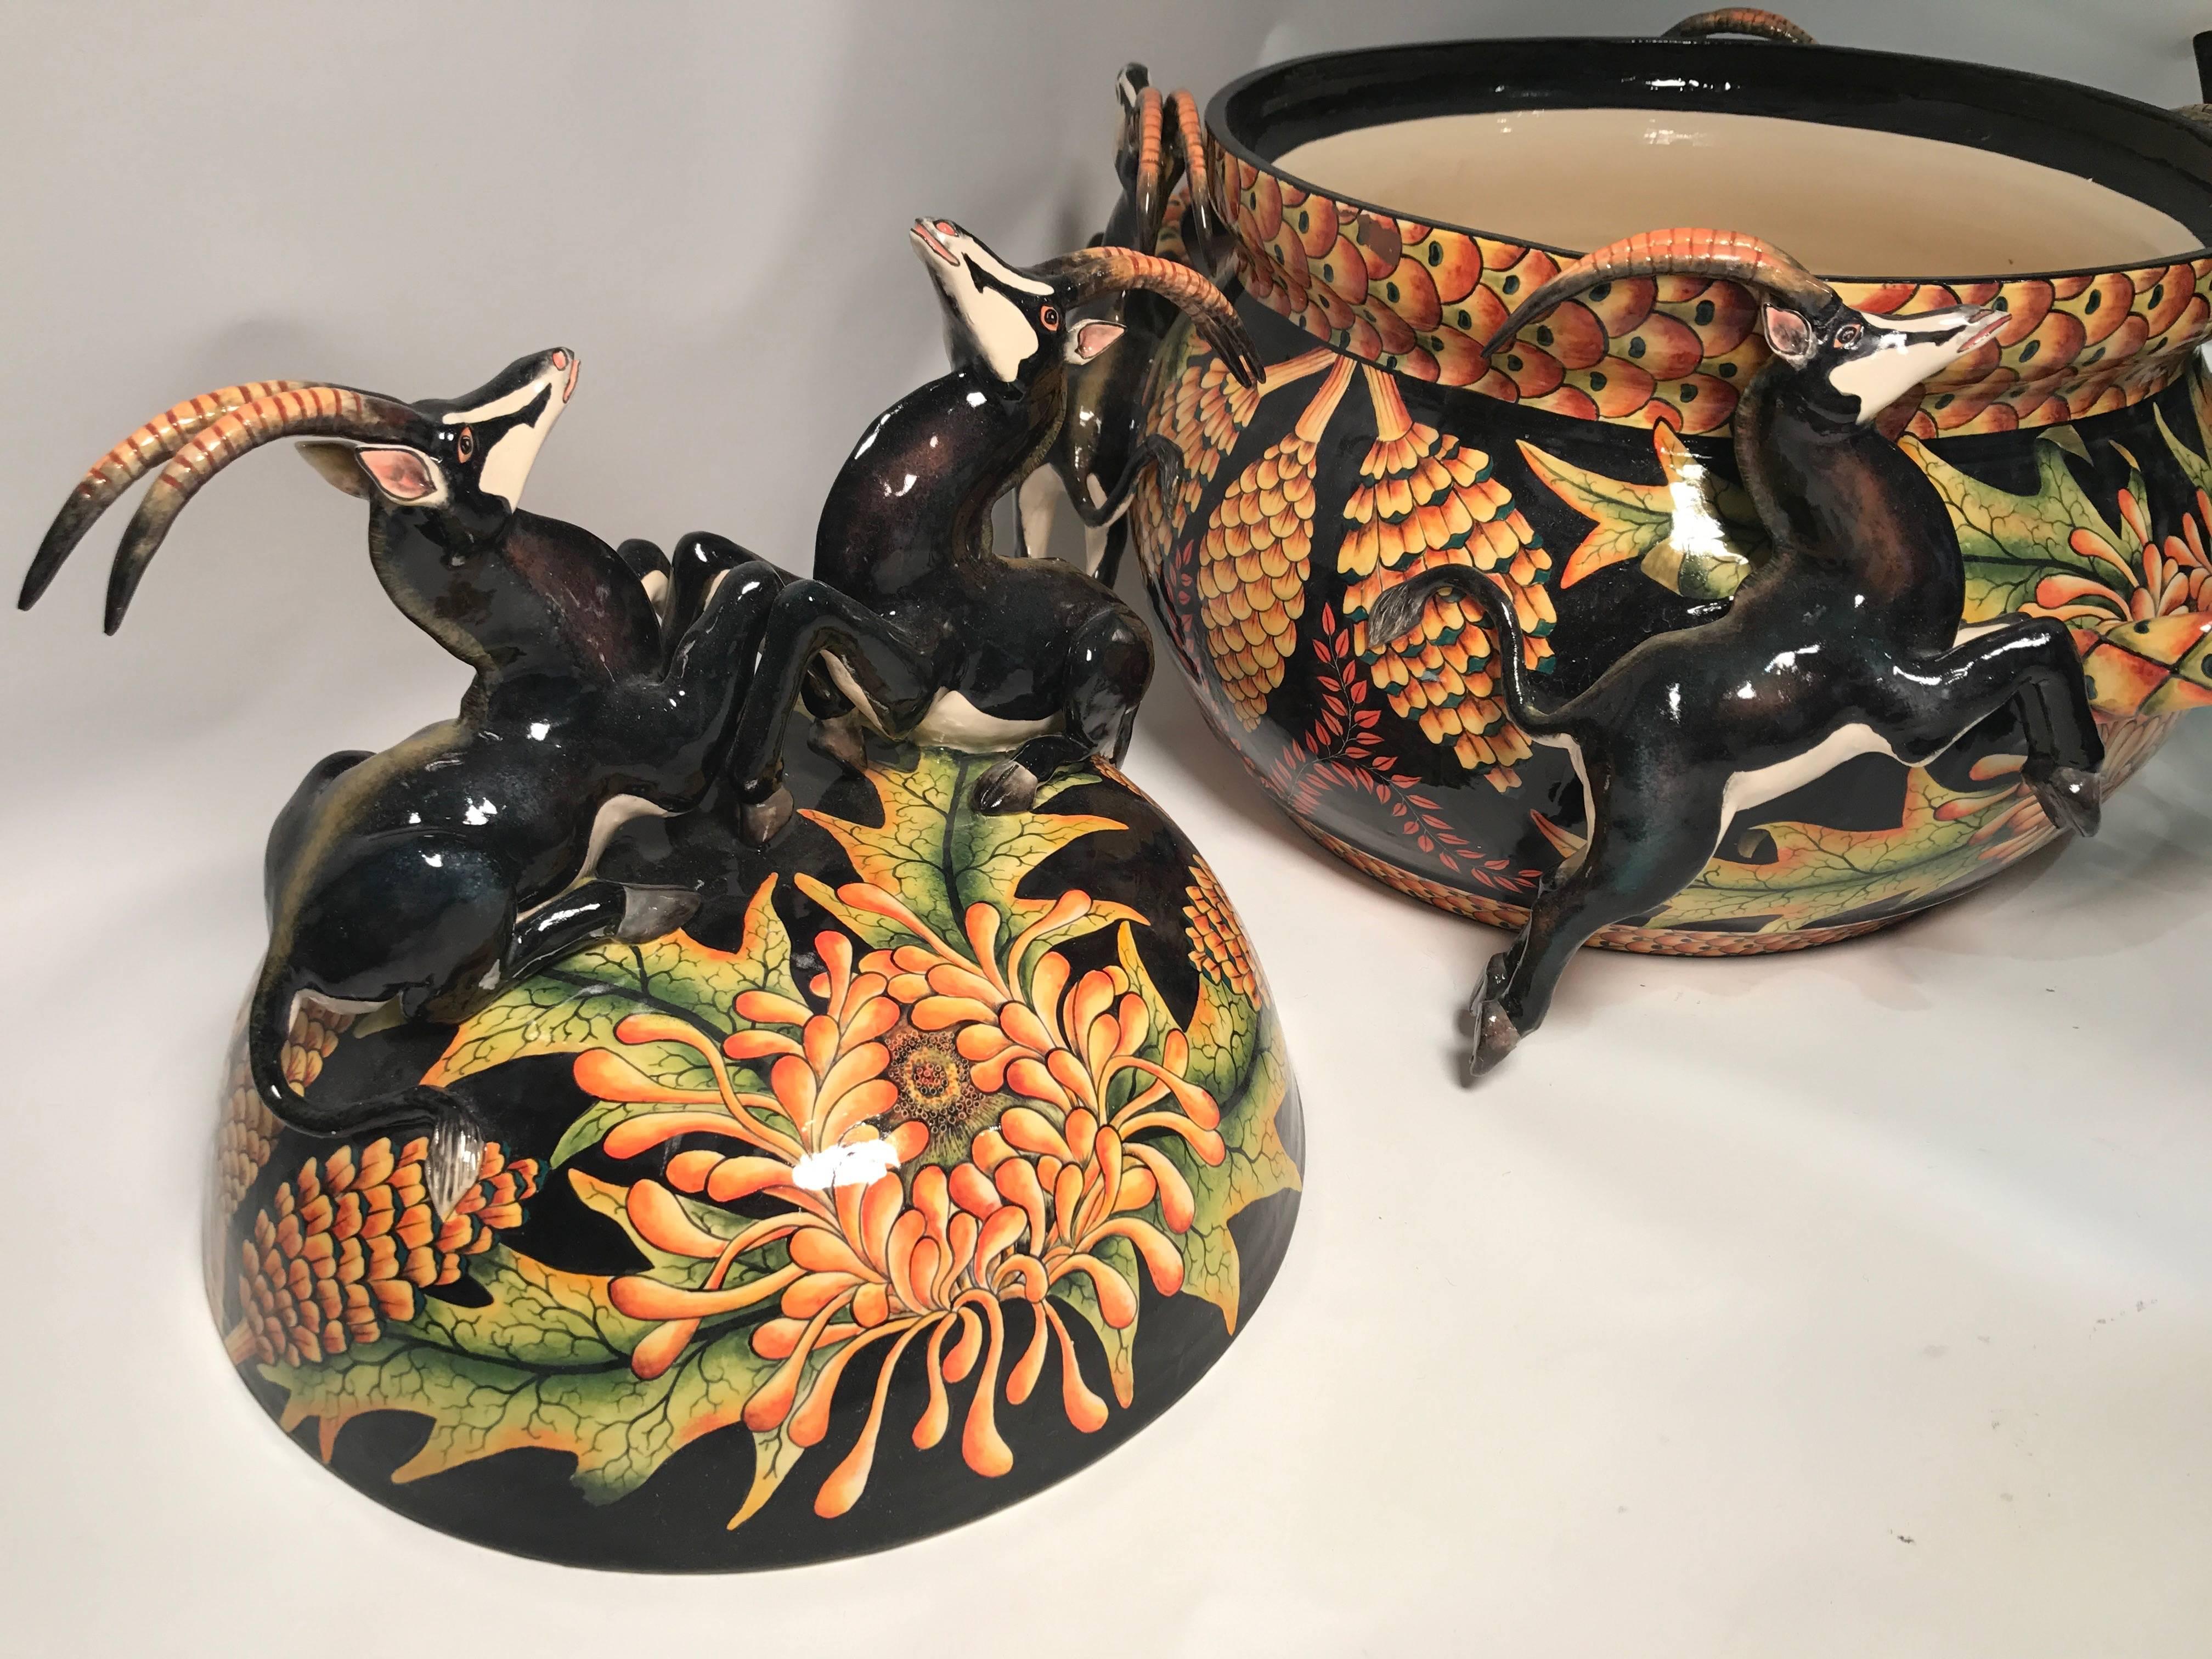 Exceptional sculpture by Ardmore Ceramics of South Africa. This Sable tureen centerpiece was sculpted by Sabelo and painted by Mandla. Ardmore ceramic art was established by Fée Halsted and is situated in the foothills of the Drakensberg Mountains